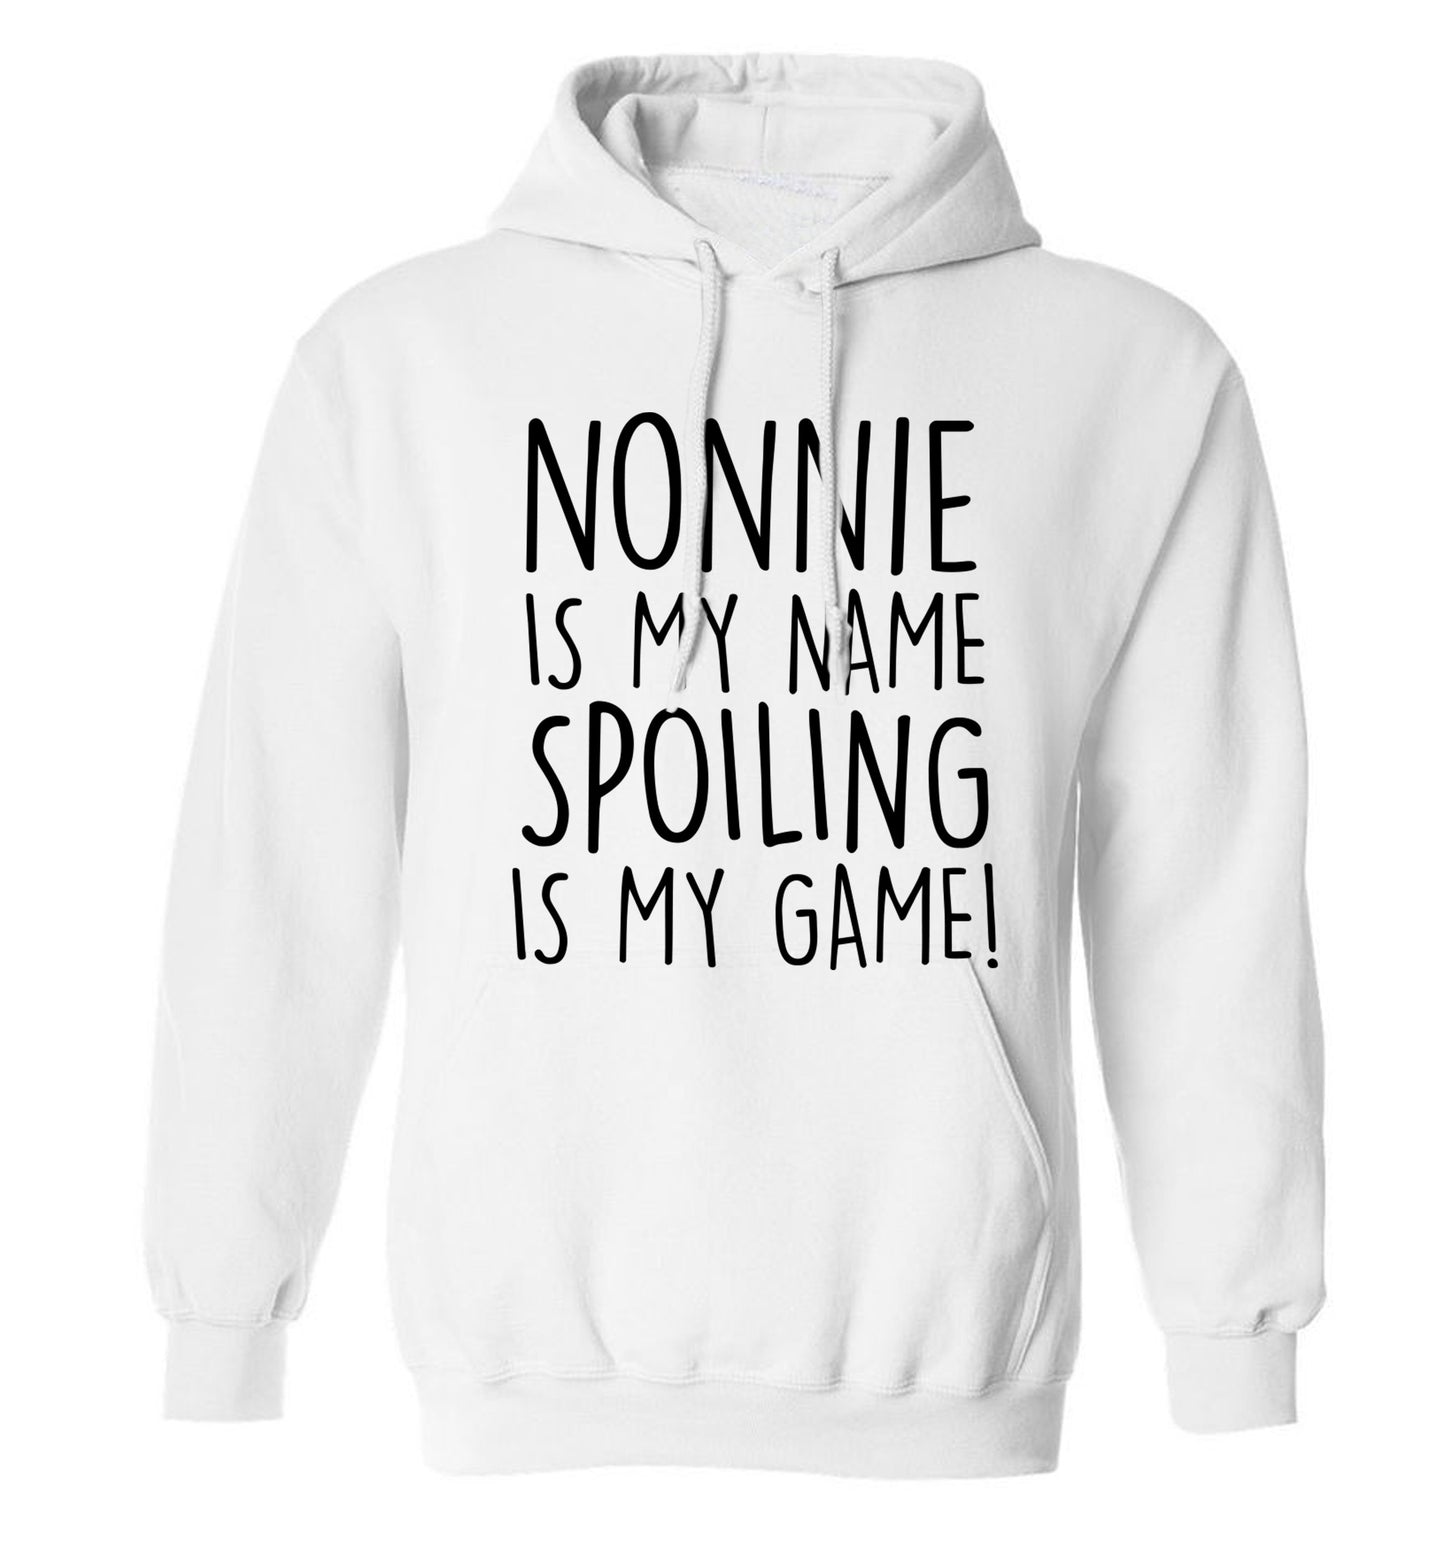 Nonnie is my name, spoiling is my game adults unisex white hoodie 2XL